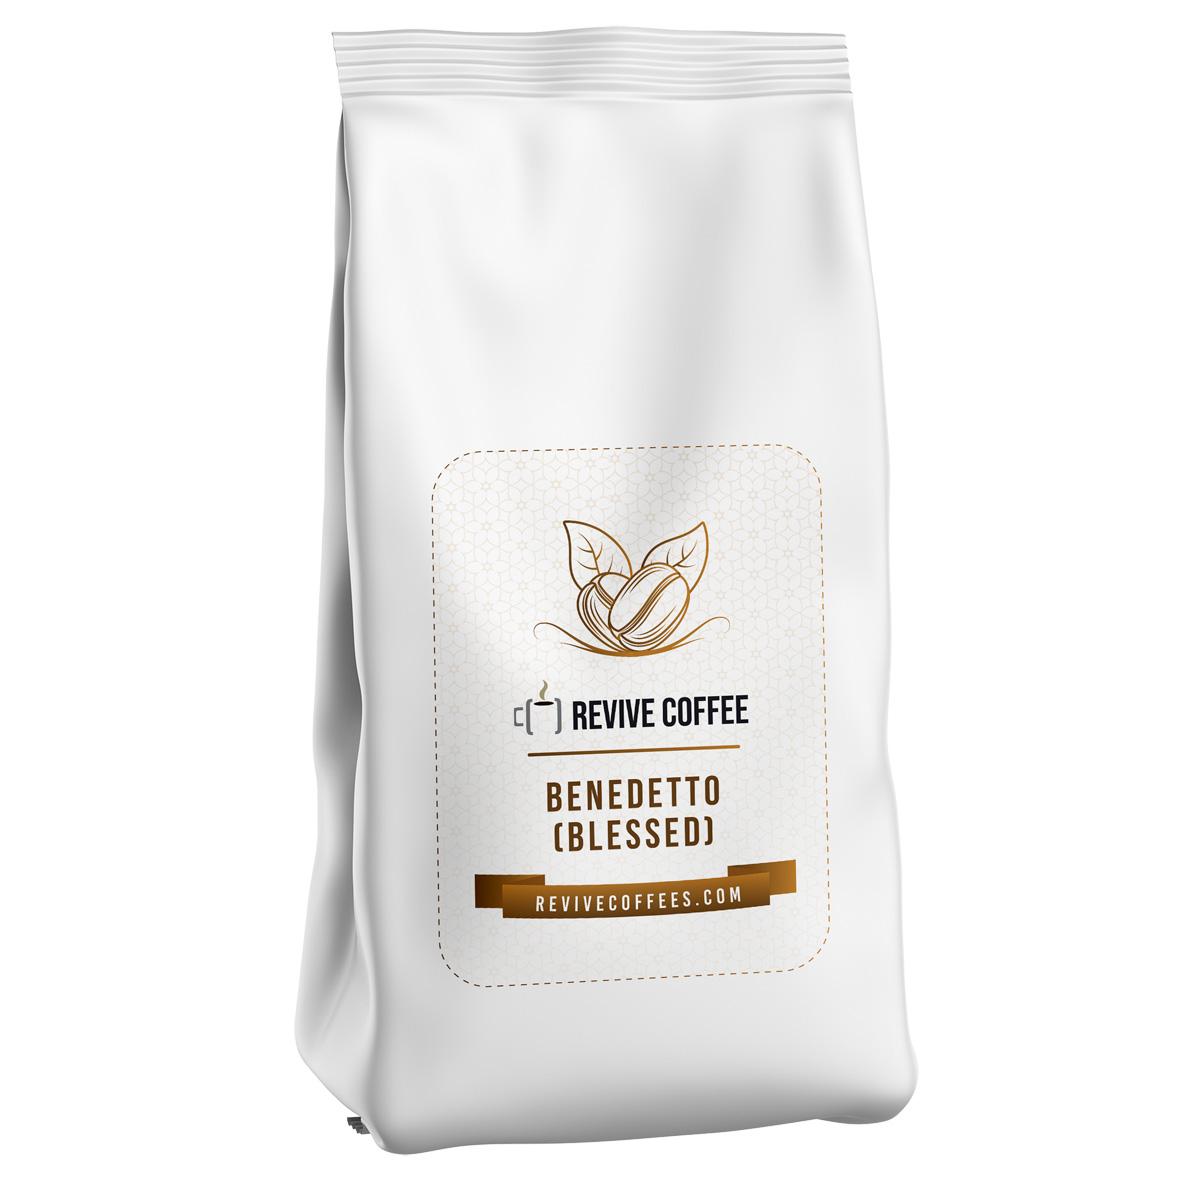 Free Revive Coffee Whole Coffee Beans